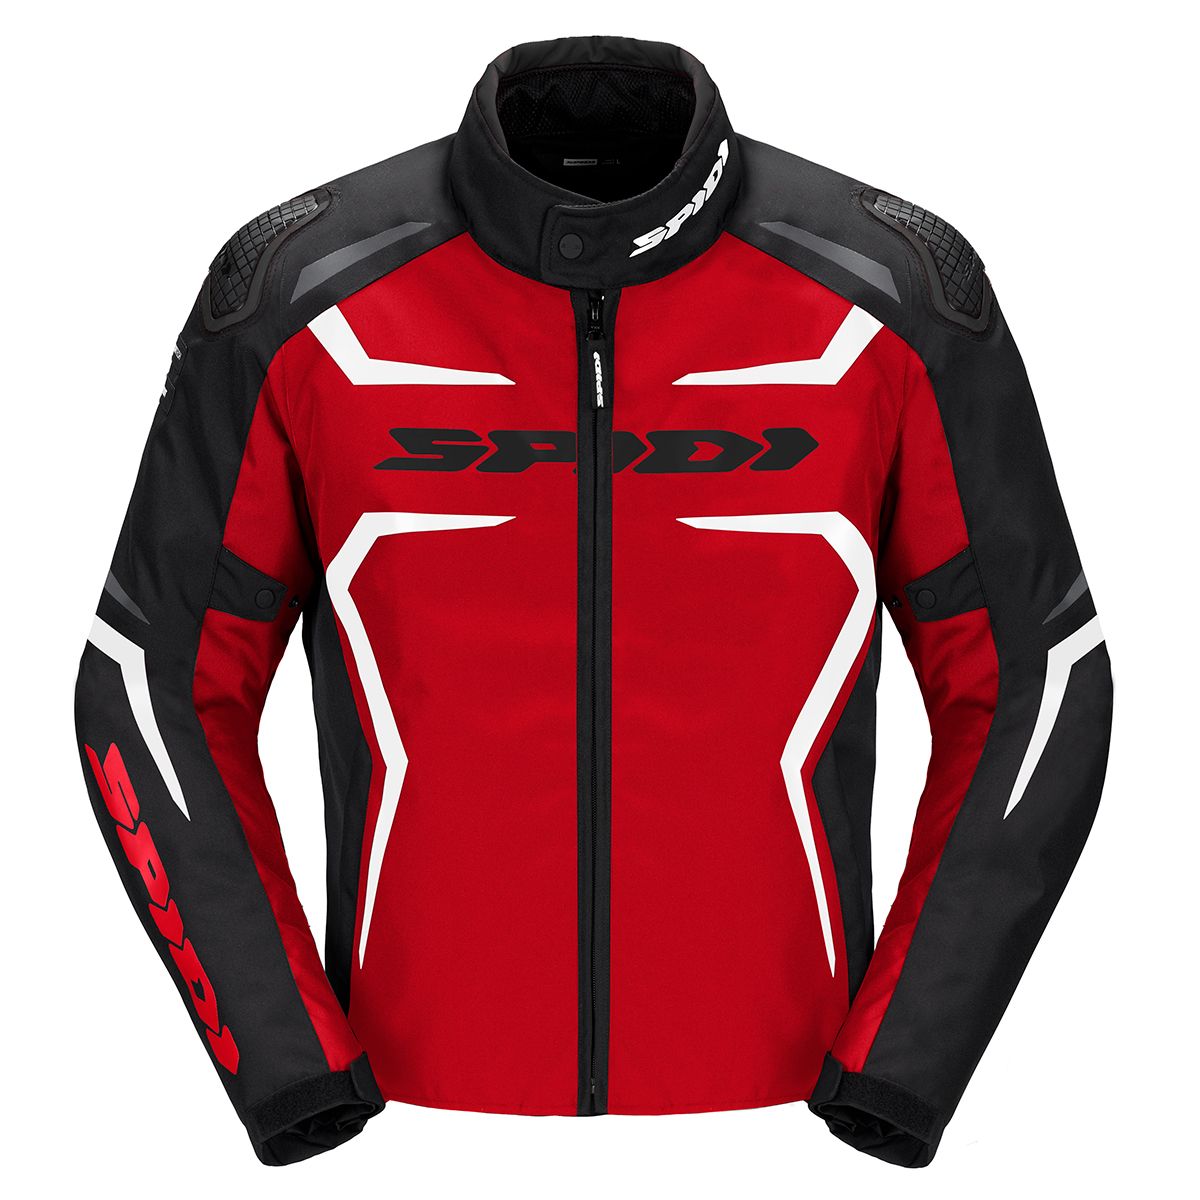 Image of Spidi Race Evo H2Out Jacket Black Red White Size M ID 8030161475425